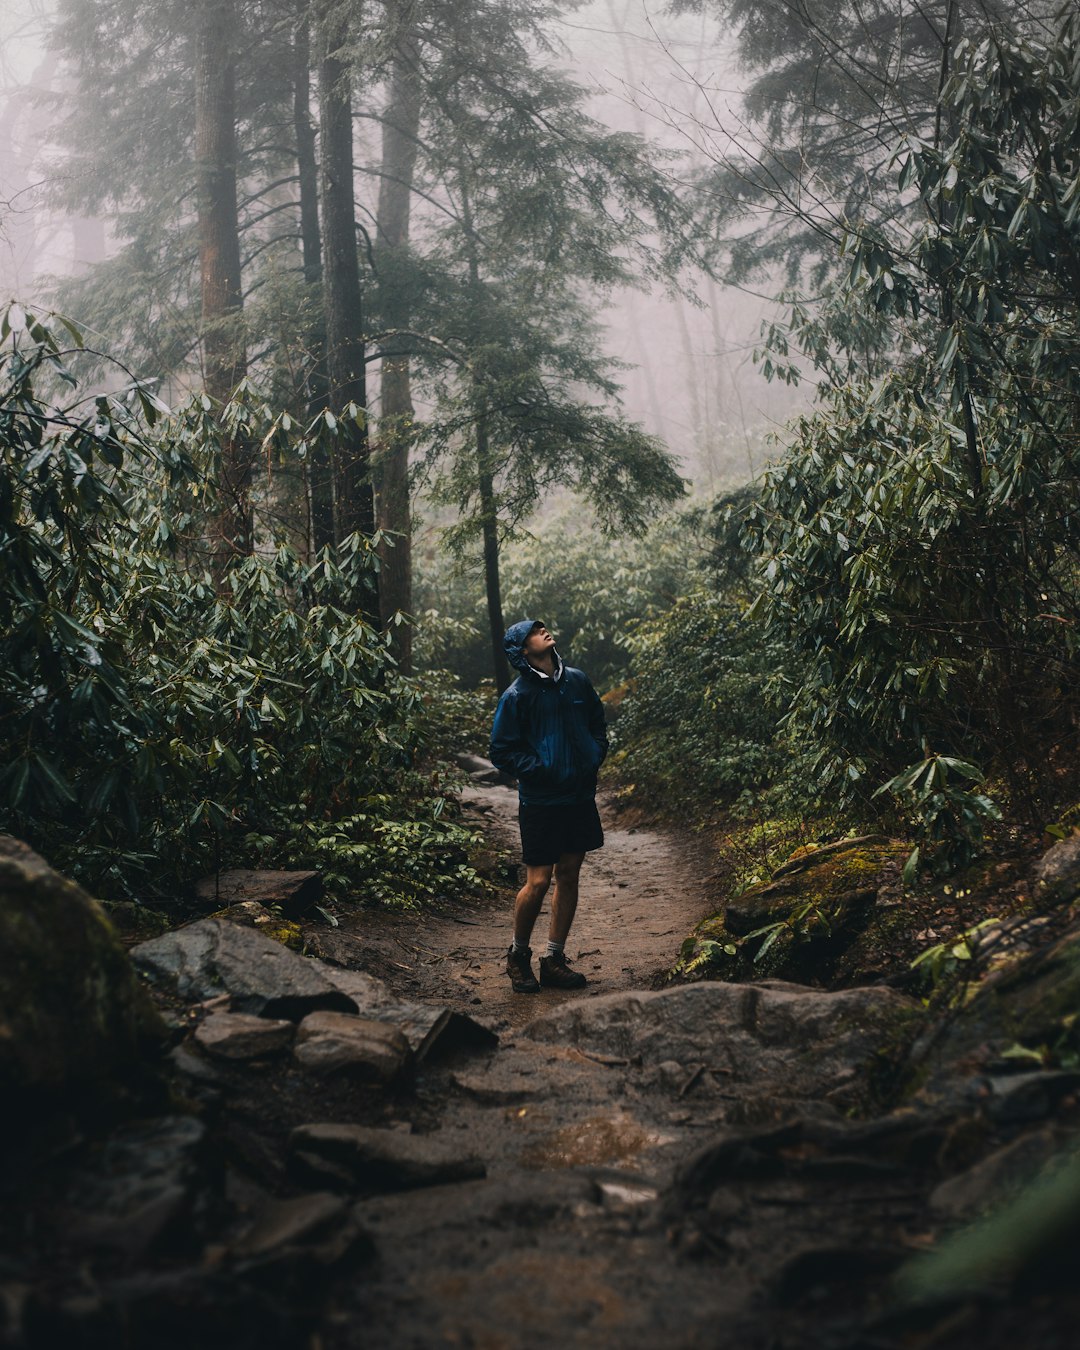 A person in a dark blue rain jacket looks up in a rainy and gray forest with pines and rhododendrons. 